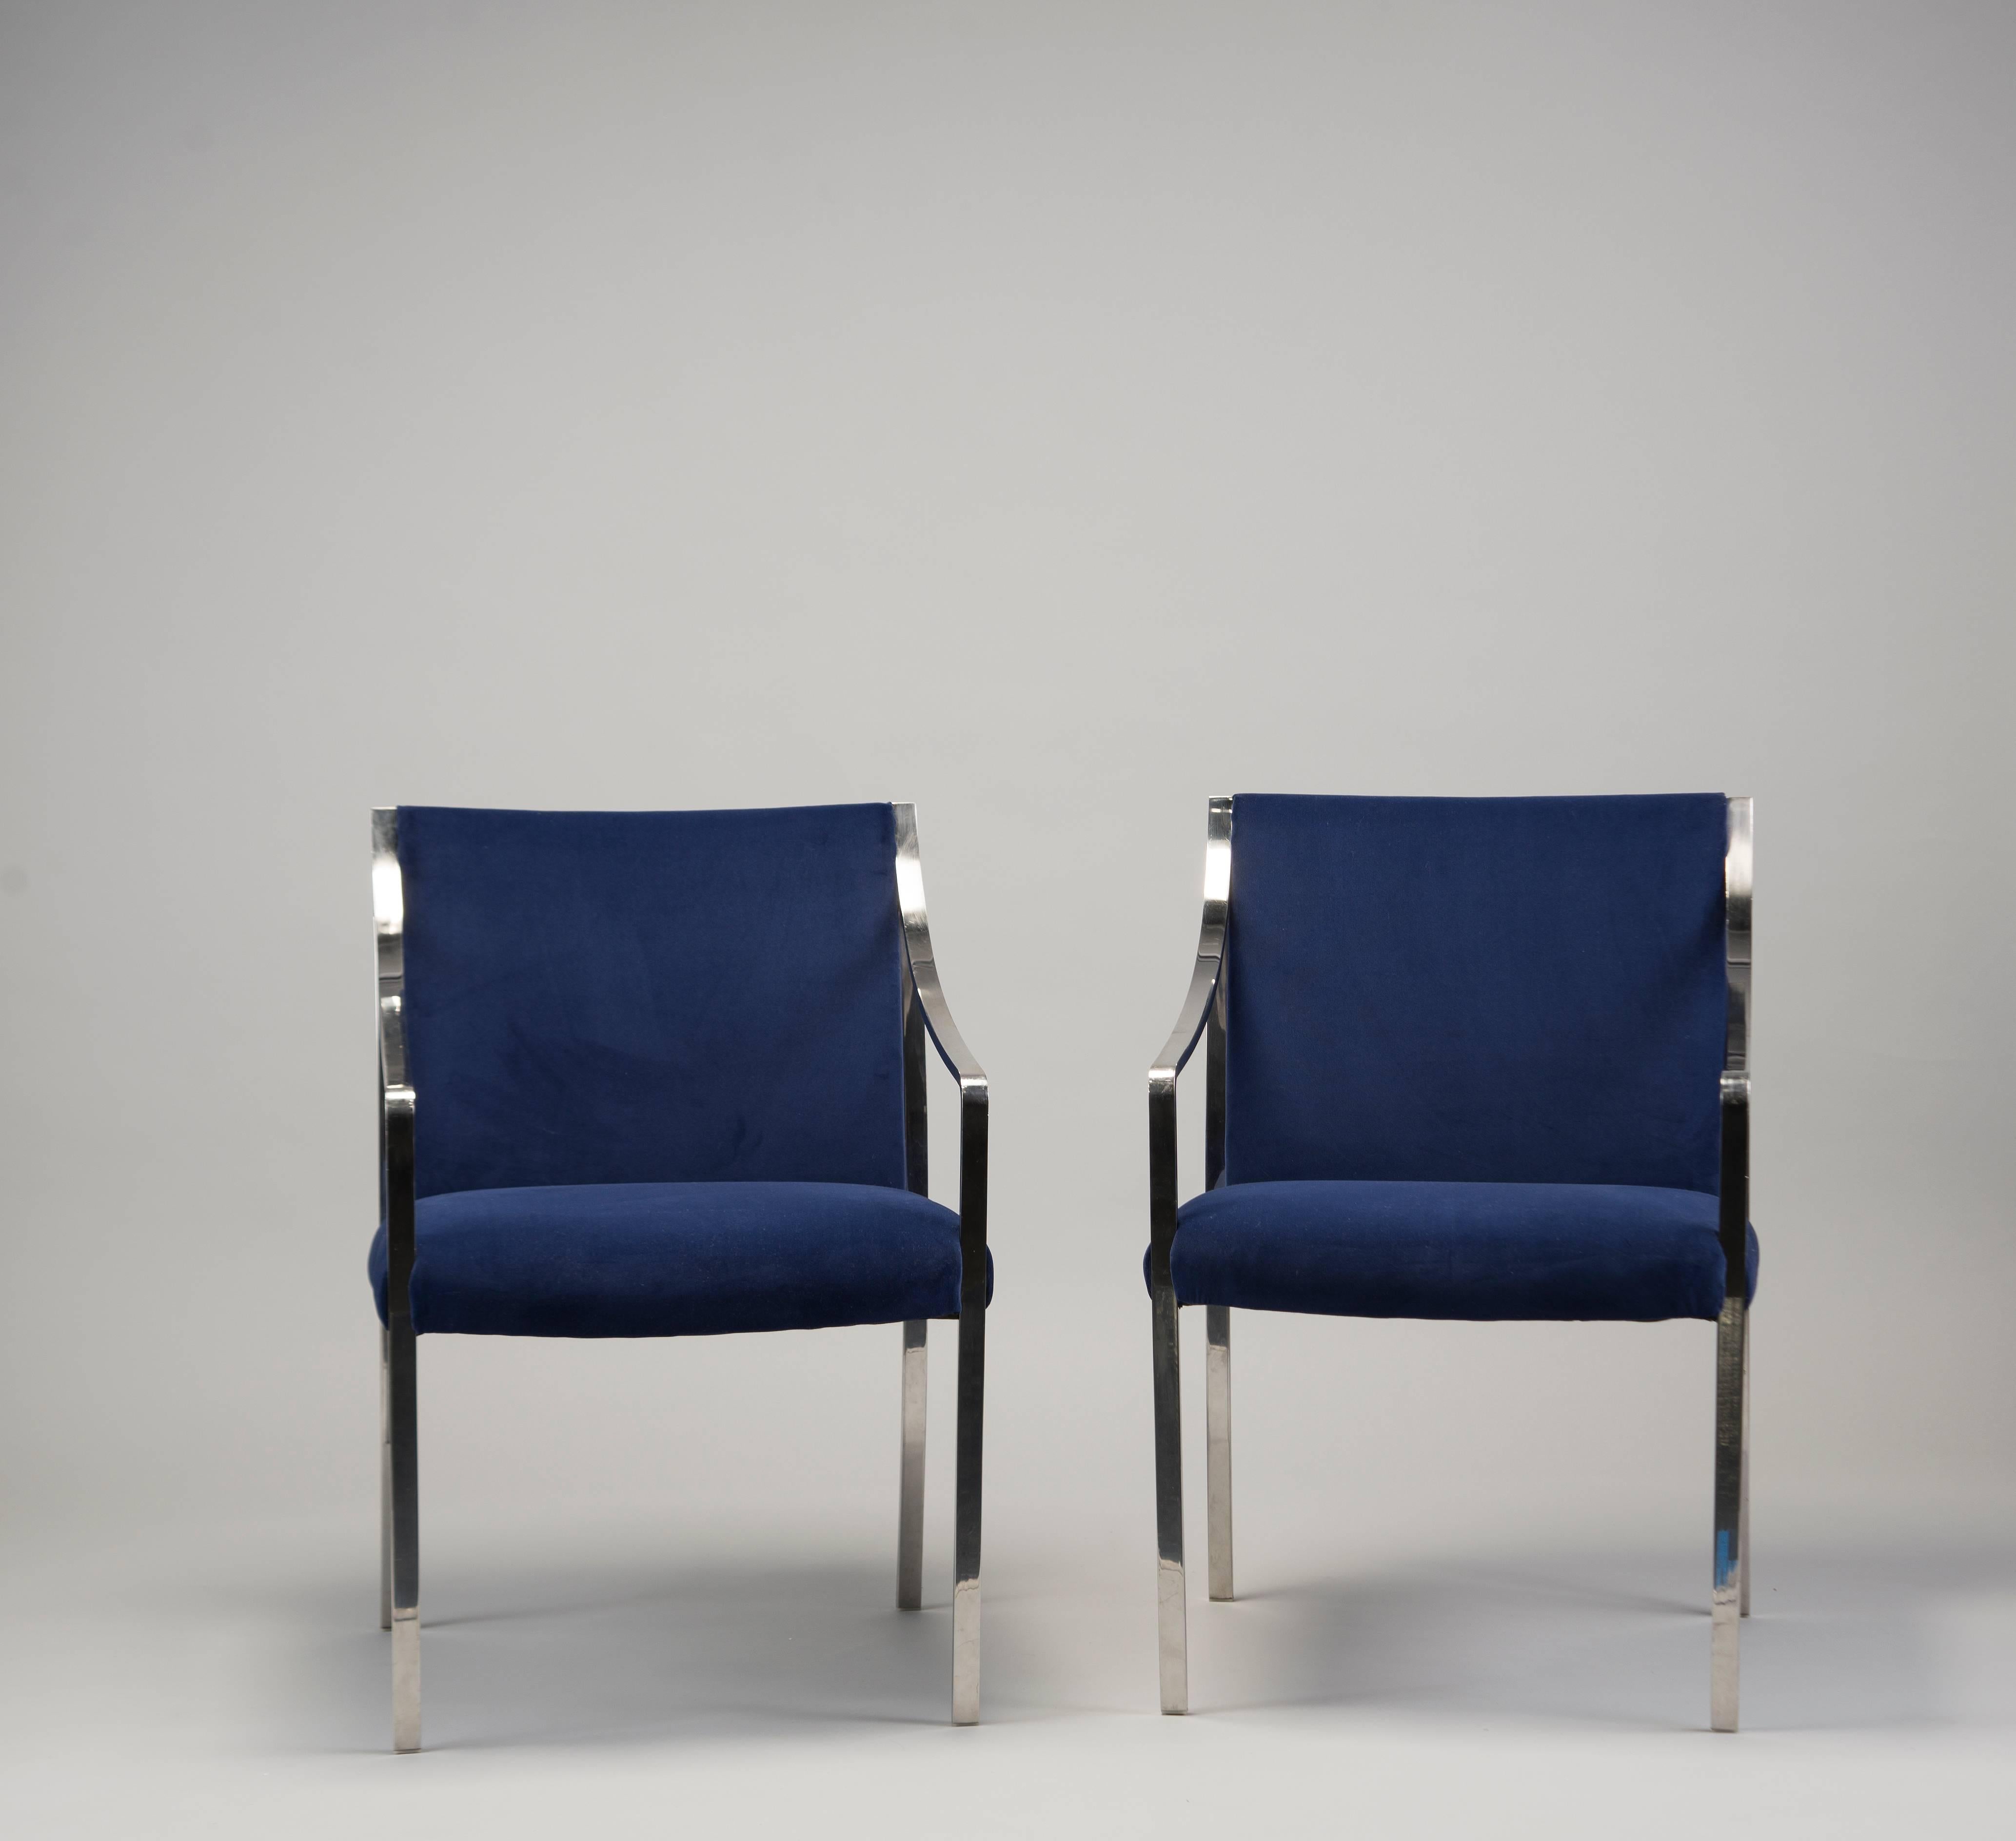 Circa 1970s pair of polished steel frame arm chairs designed by Bert England for Stow Davis. Newly upholstered in royal blue velvet. Seats are 18.5” high and 19” deep. Sold and priced as a pair. Two pairs available at time of posting. 
